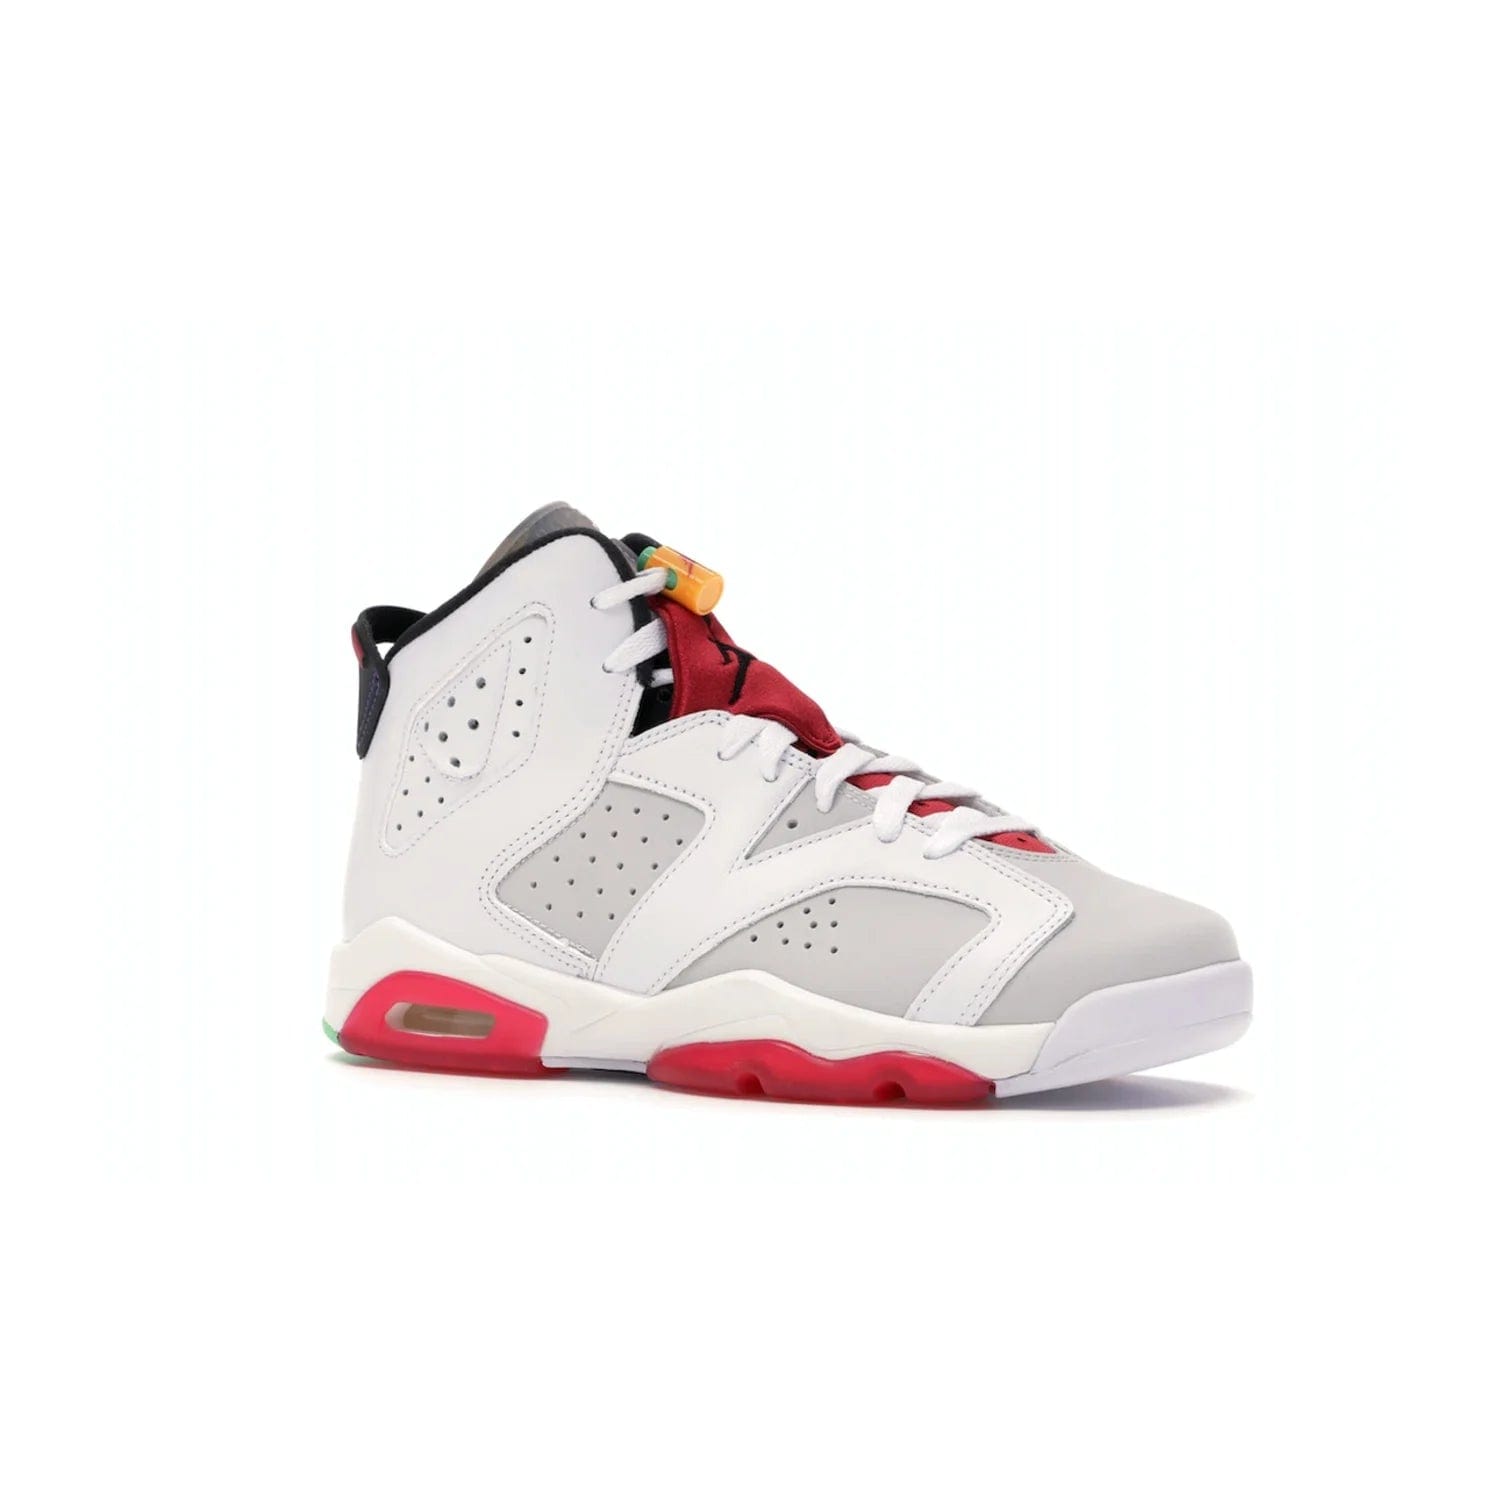 Jordan 6 Retro Hare (GS) - Image 4 - Only at www.BallersClubKickz.com - The Air Jordan 6 Hare GS. Comfortable suede upper, perforations, red pods, two-tone midsole, and signature "Jumpman" emblem. Released 17 June 2020. Perfect for any sneakerhead.